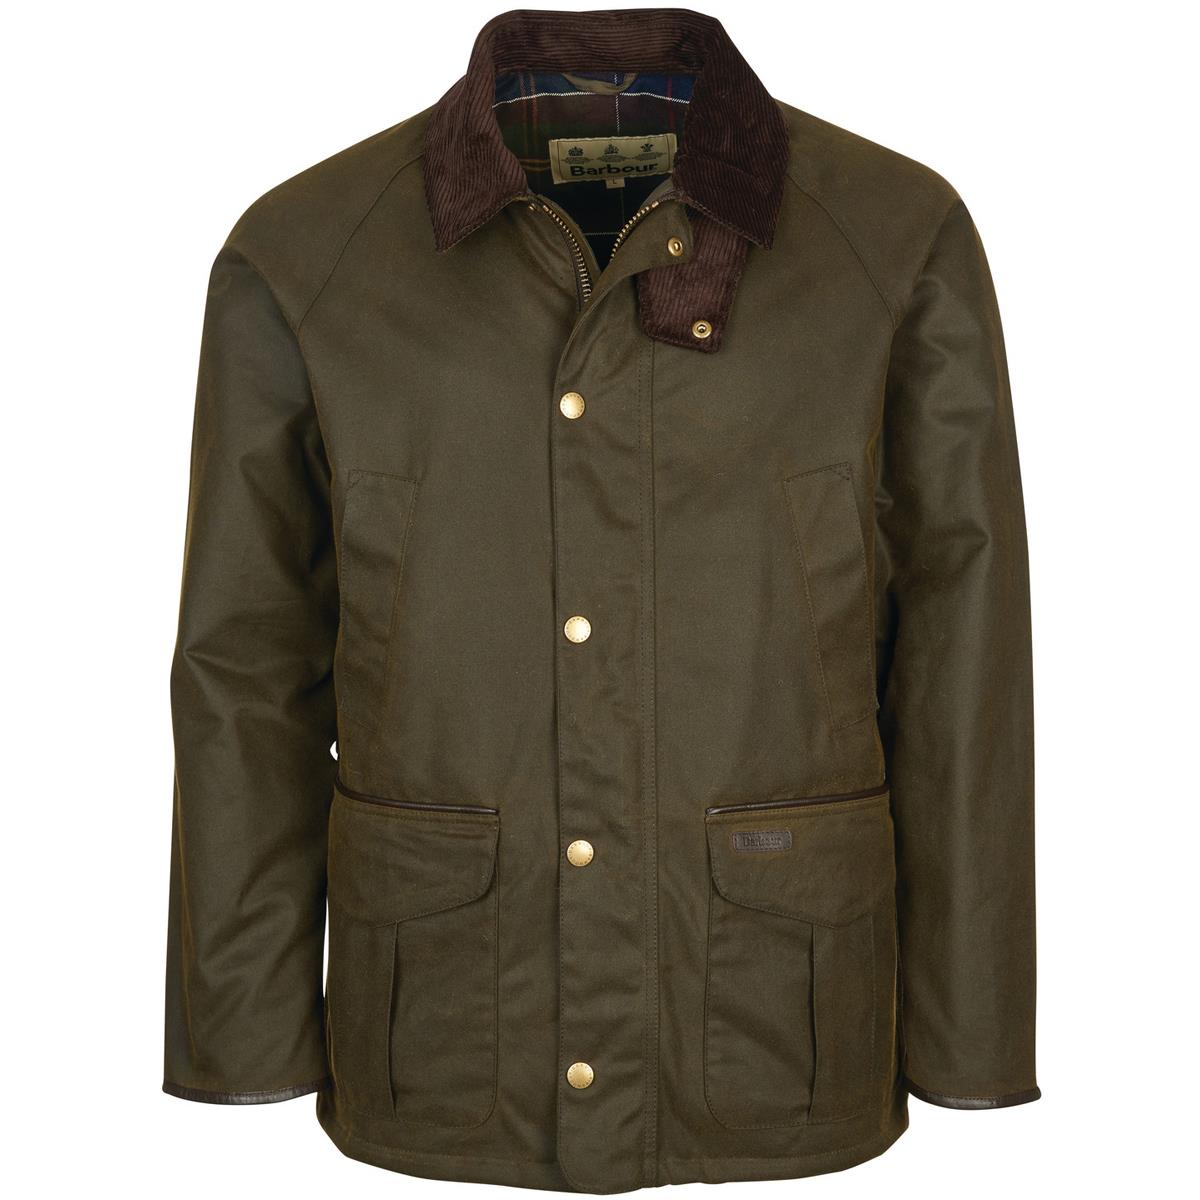 Which finish is your Barbour Stratford jacket in - Sylkoil, Thornproof or Oban?